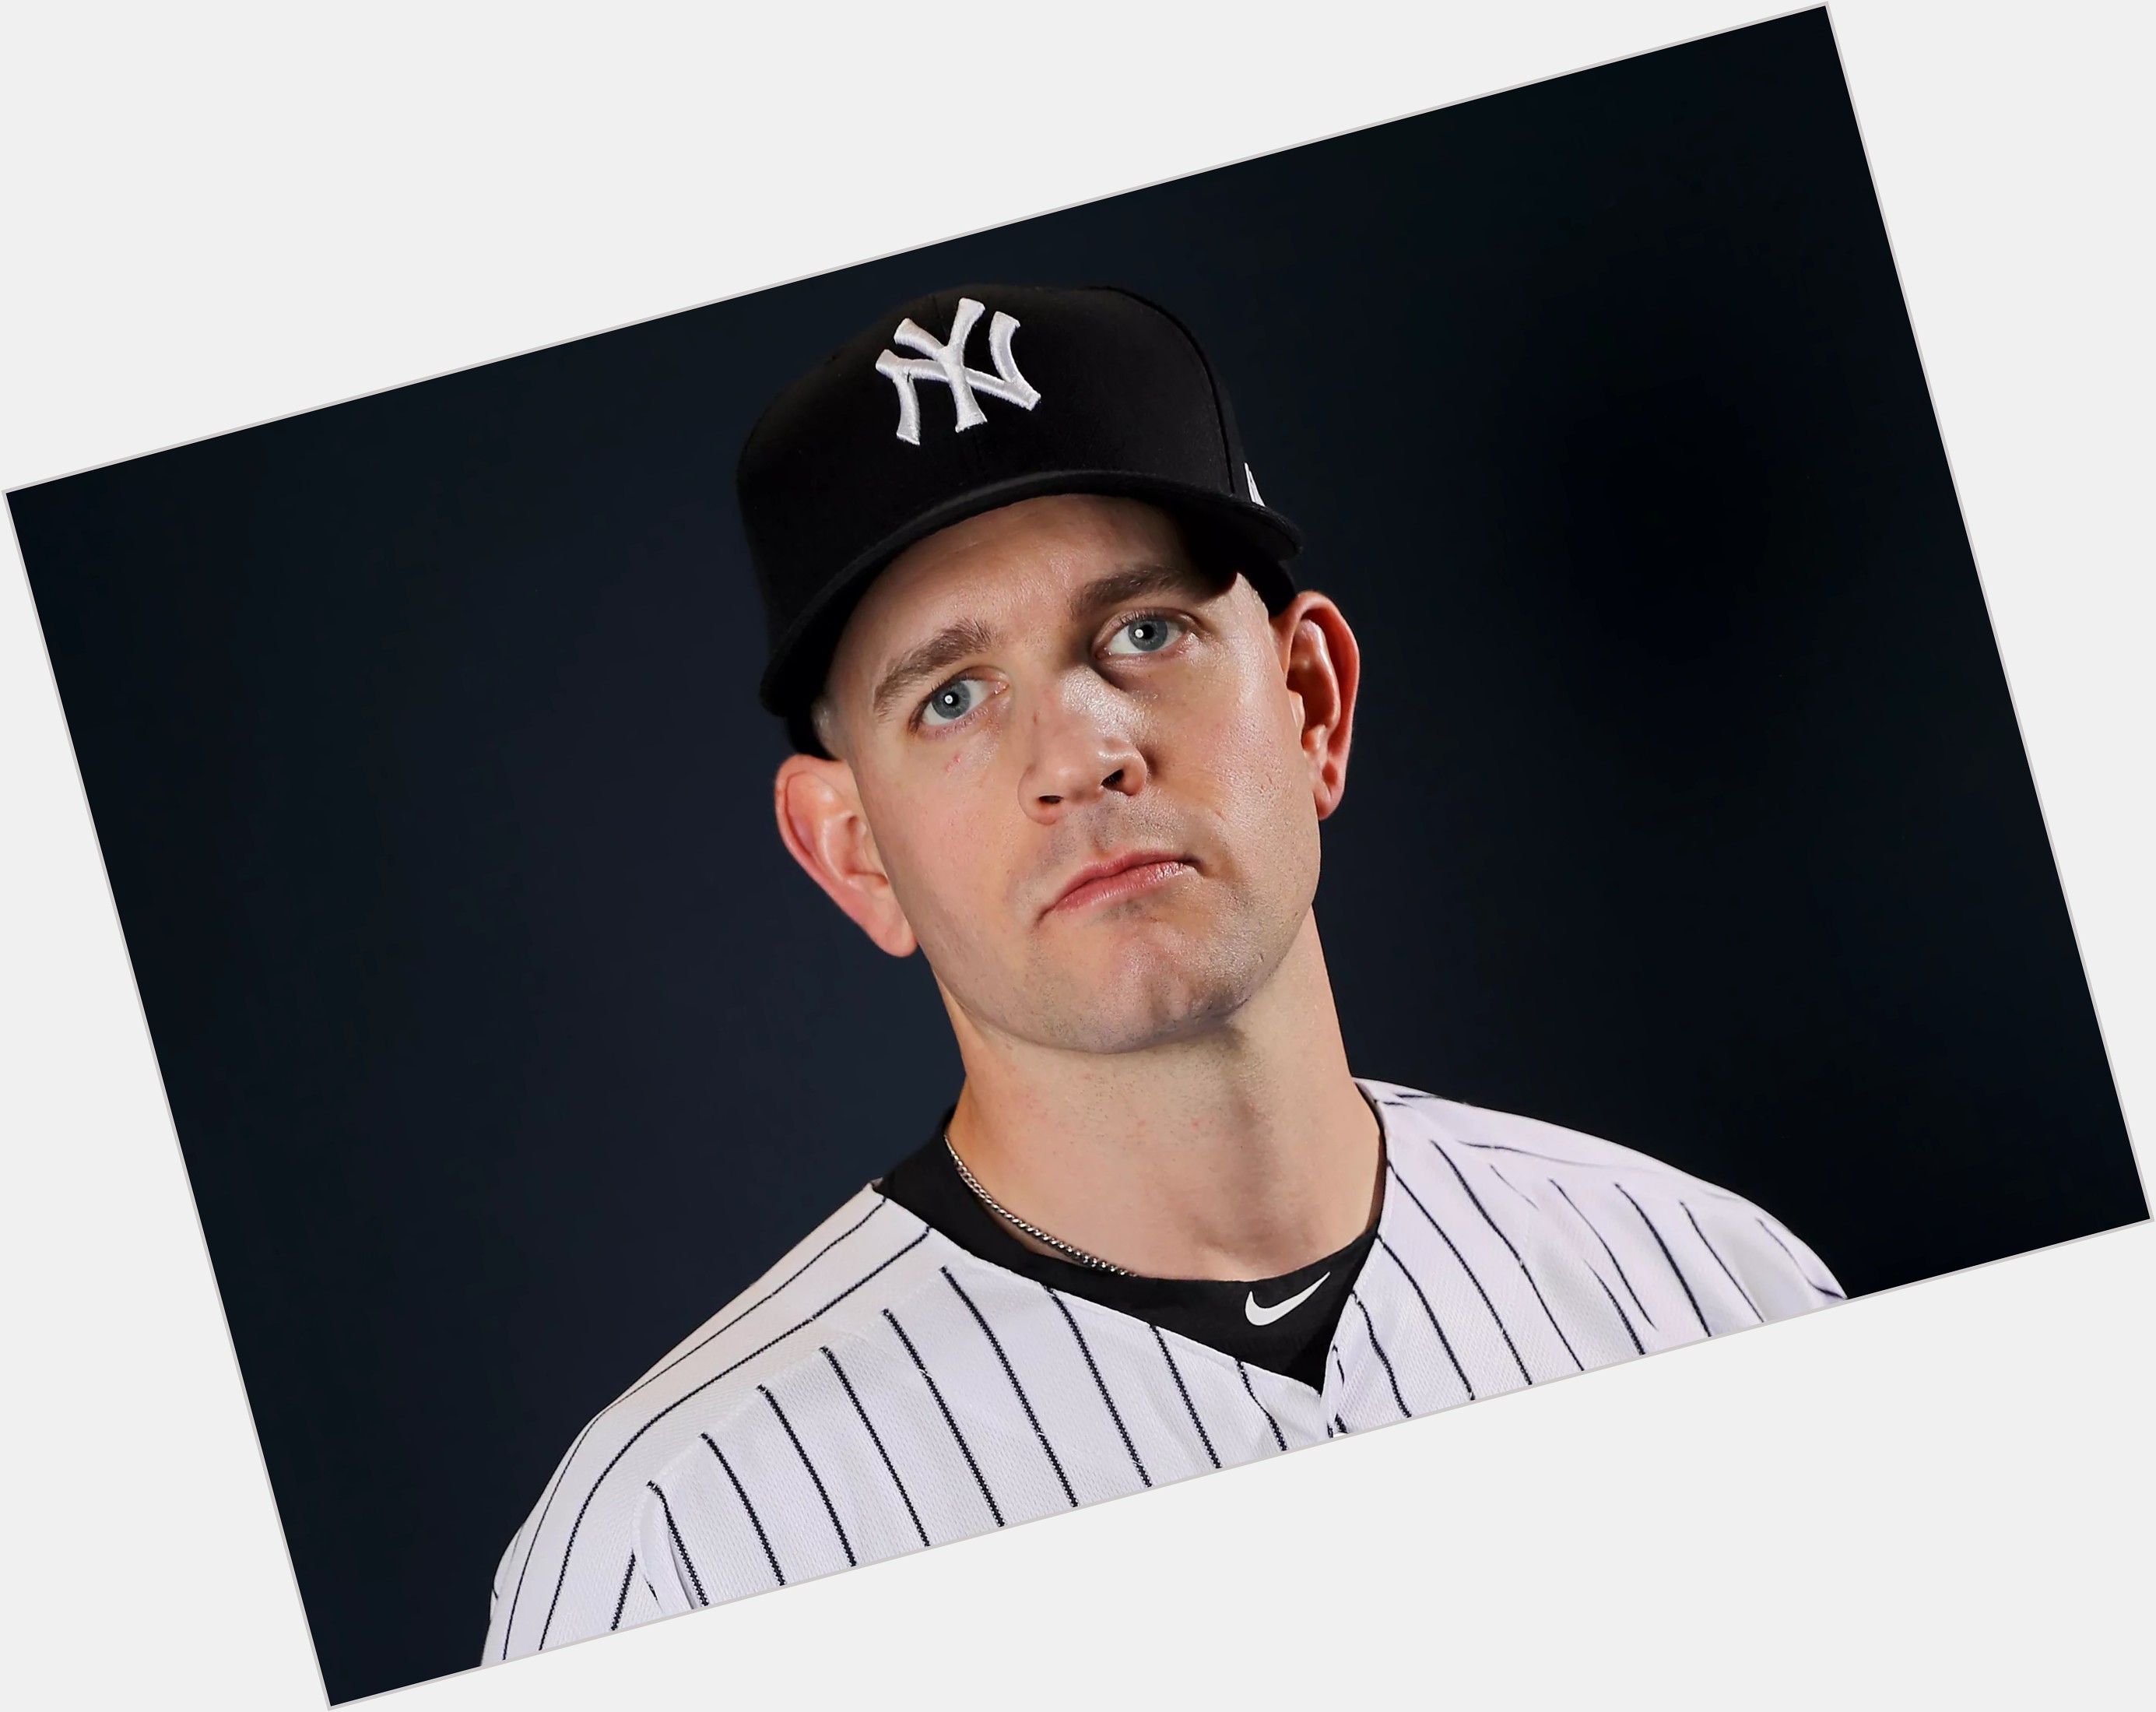 James Paxton picture 1.jpg